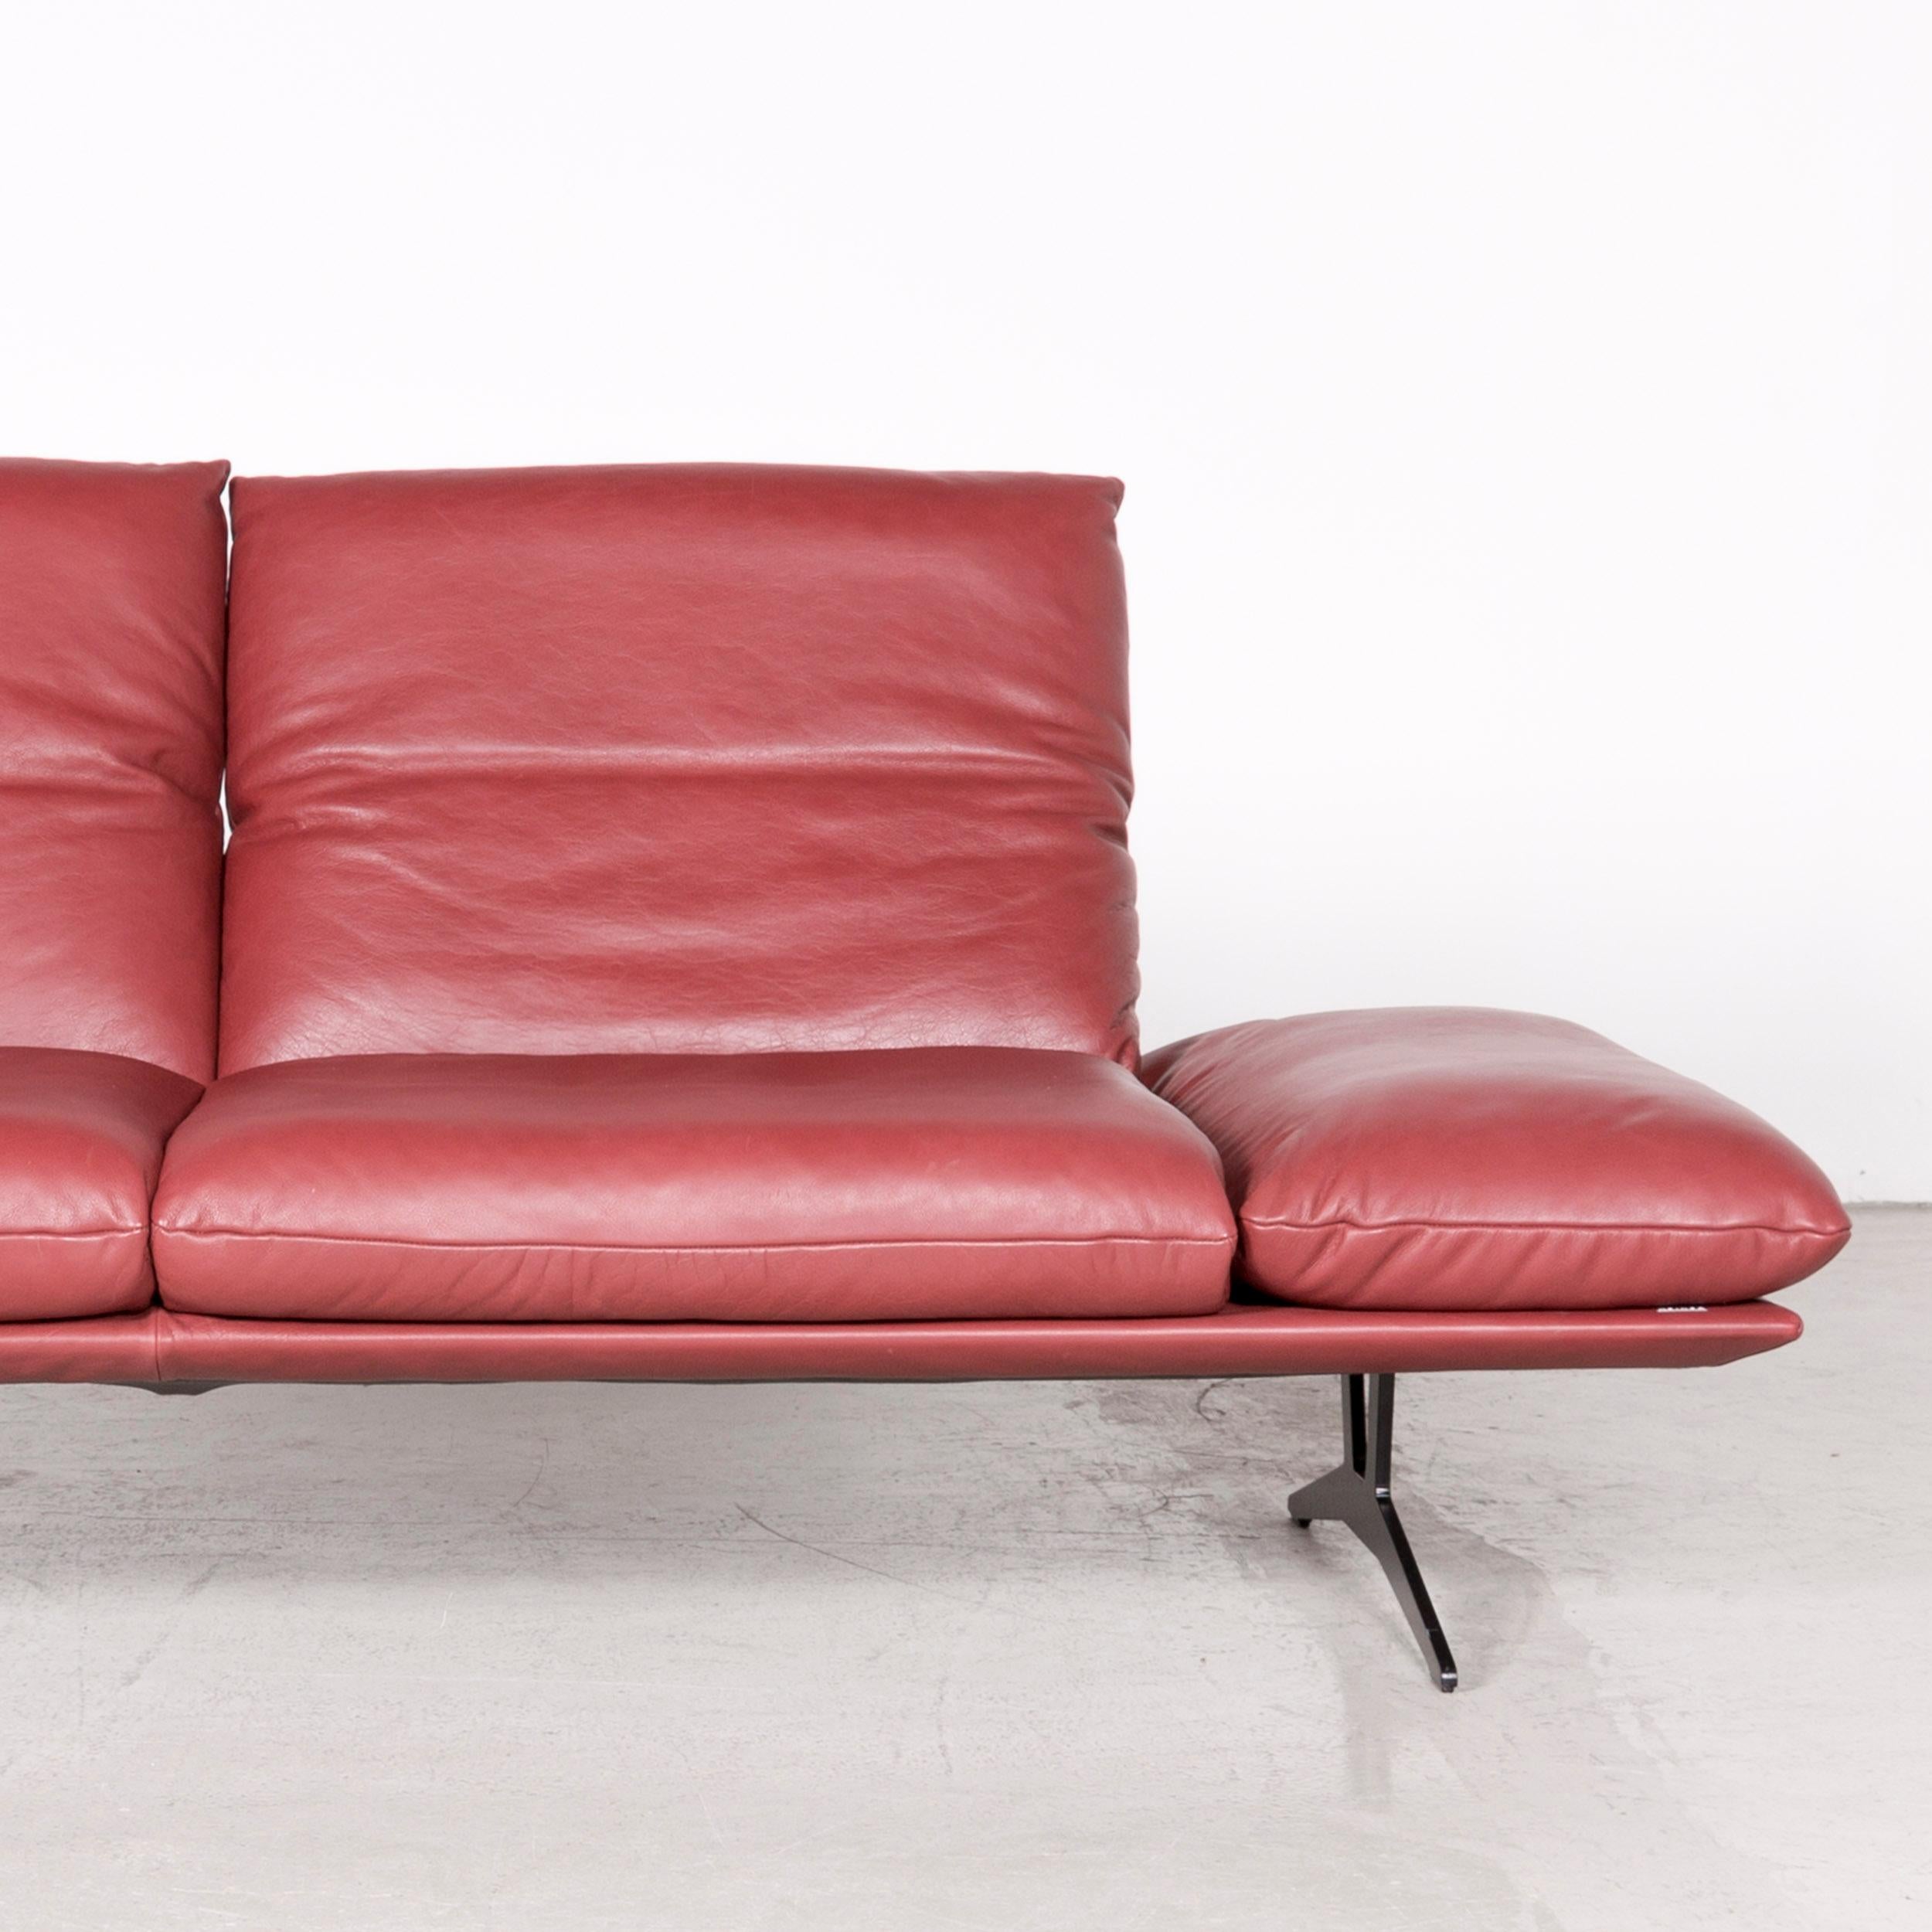 Contemporary Koinor Francis Designer Leather Sofa Red Three-Seat Couch